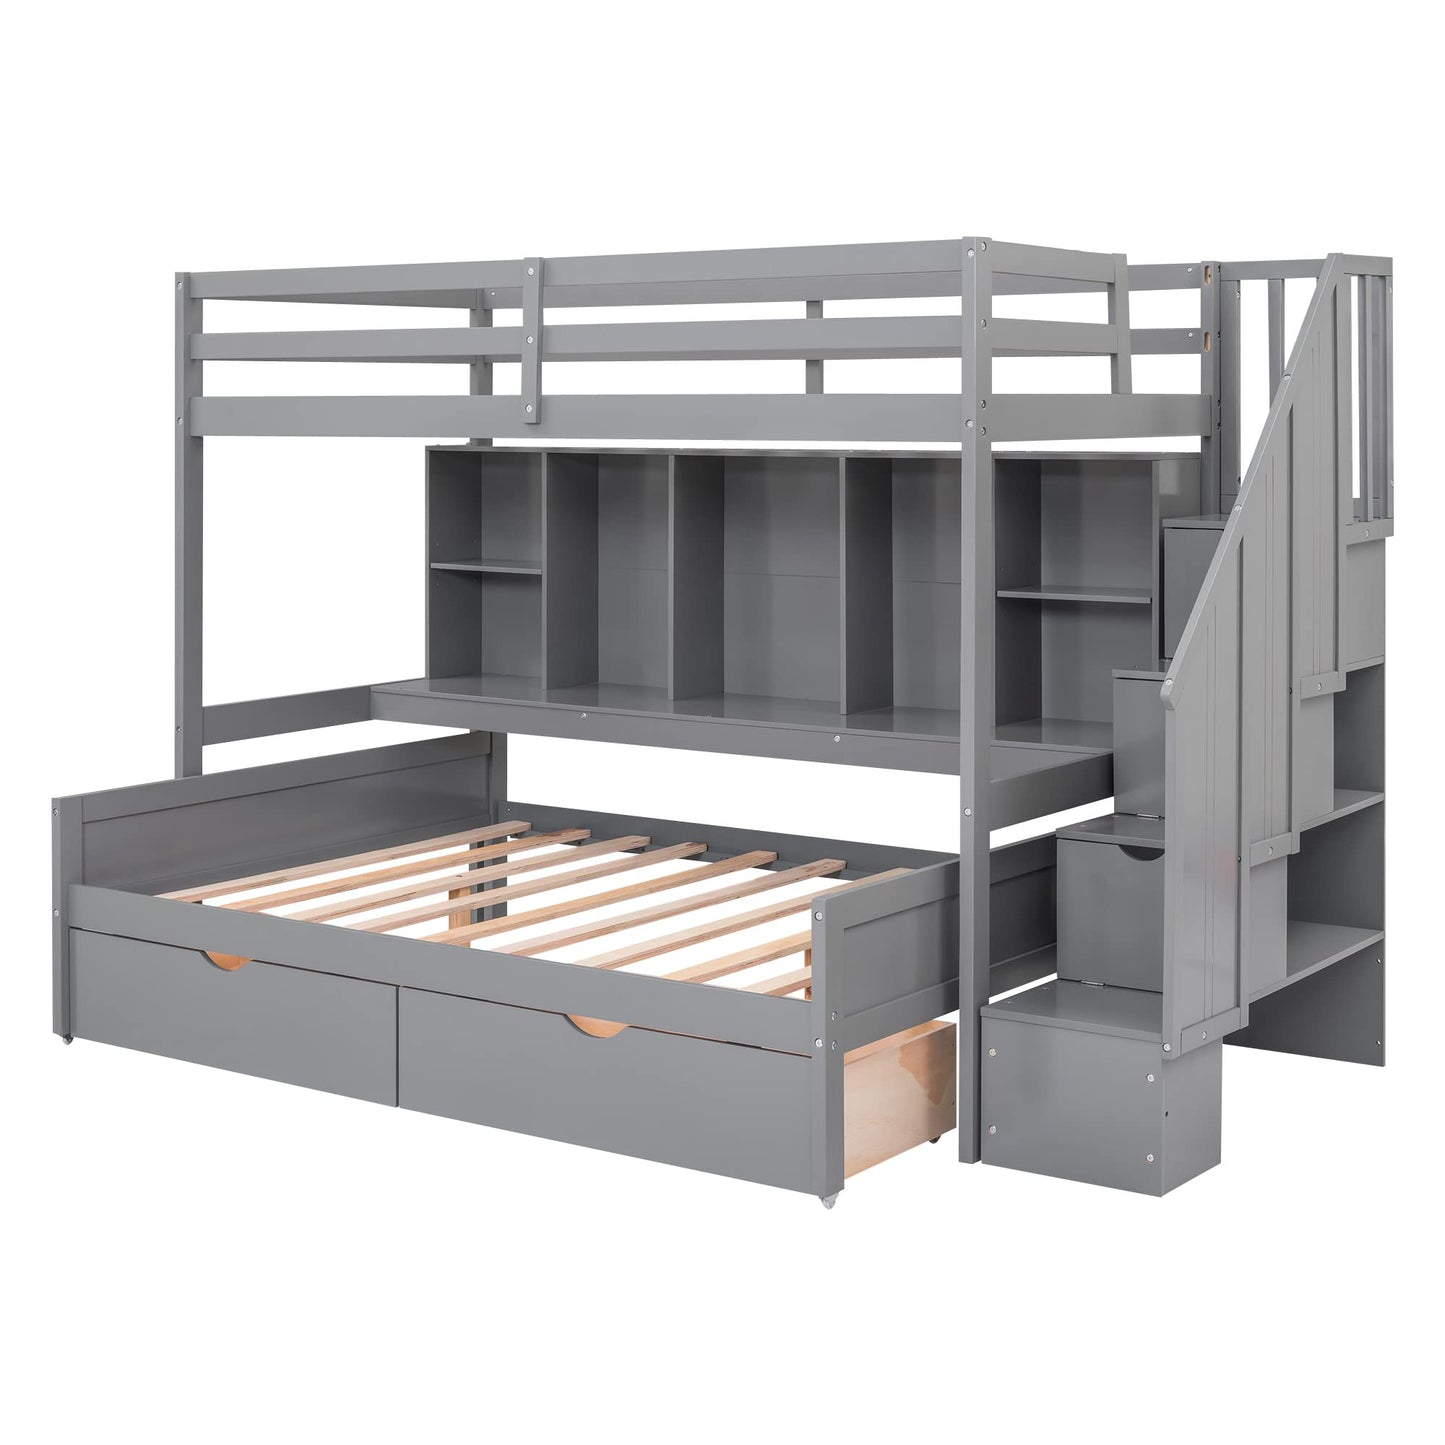 BIADNBZ Twin XL Over Full Bunk Bed with Stairs, Storage Drawers and Built-in Storage Shelves, Wood Stackable BunkBed can be Convertible into LoftBed &A Platform Bedframe, for Kids Teens Adults, Gray